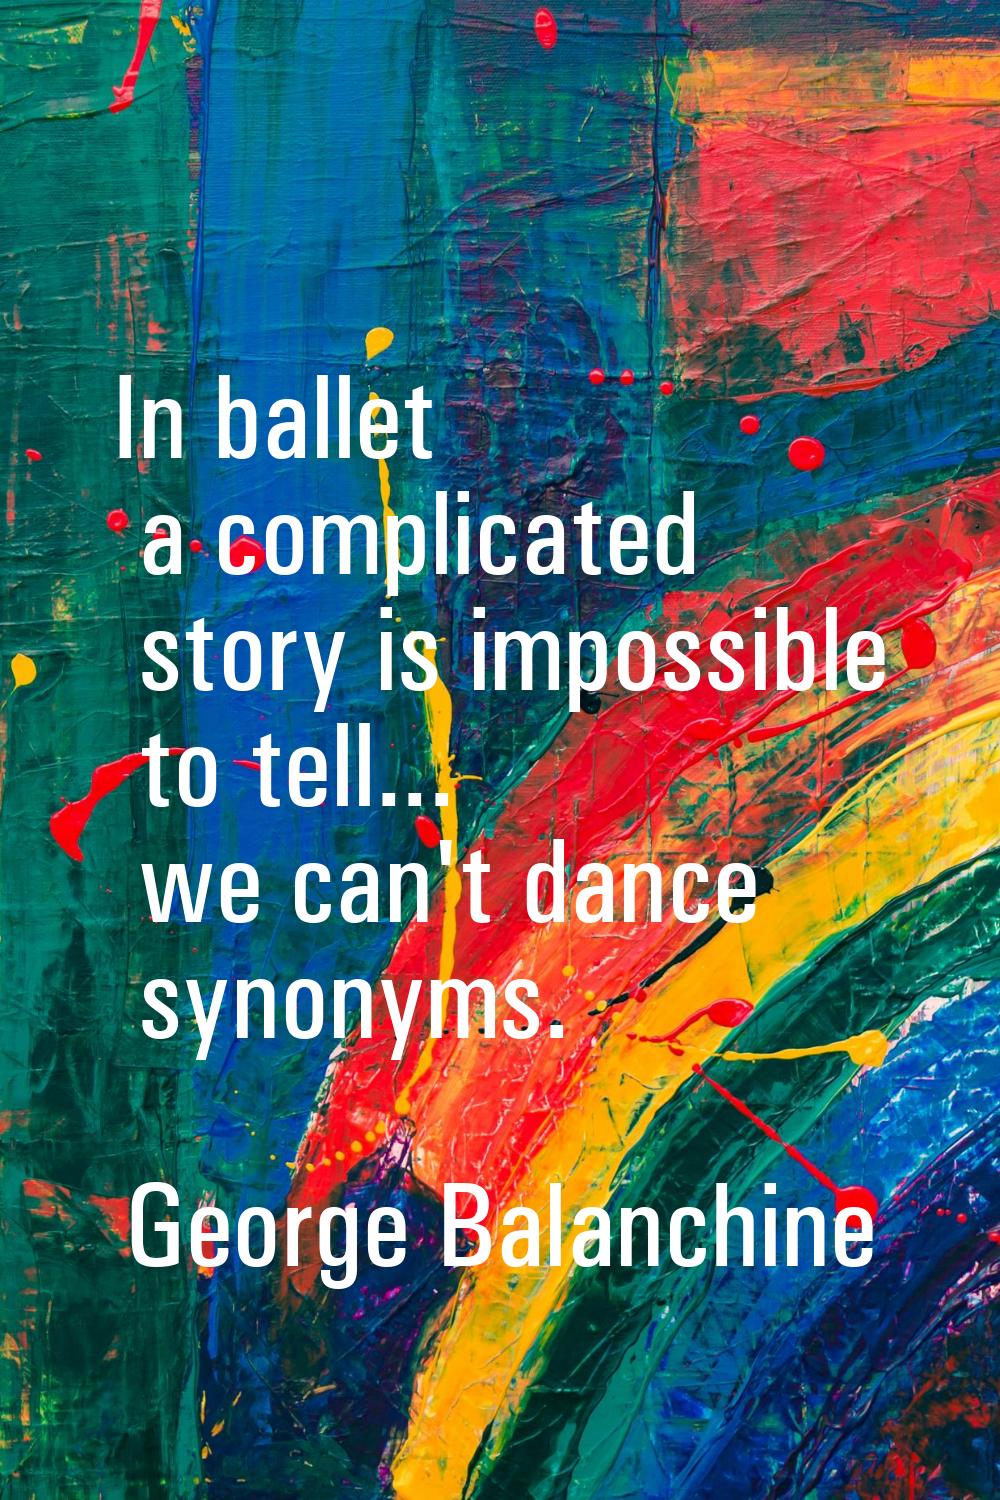 In ballet a complicated story is impossible to tell... we can't dance synonyms.